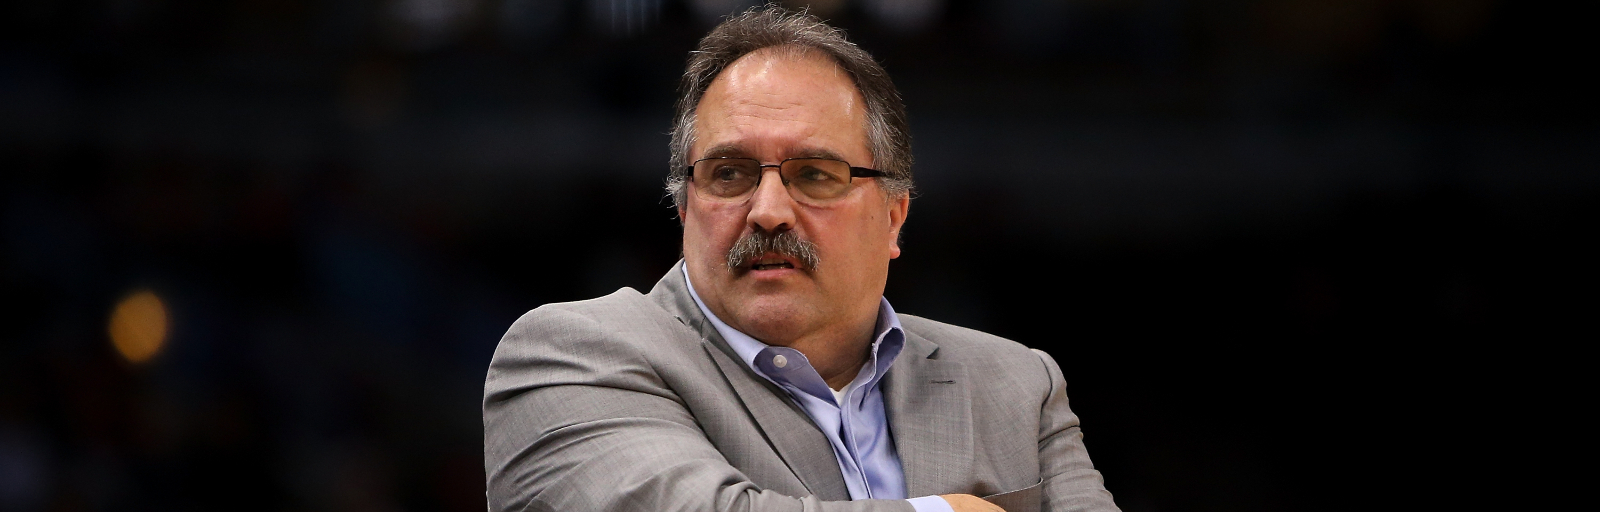 Stan Van Gundy Won’t ‘Concern’ Himself With Bill Simmons Calling Him The Worst Coach In The NBA